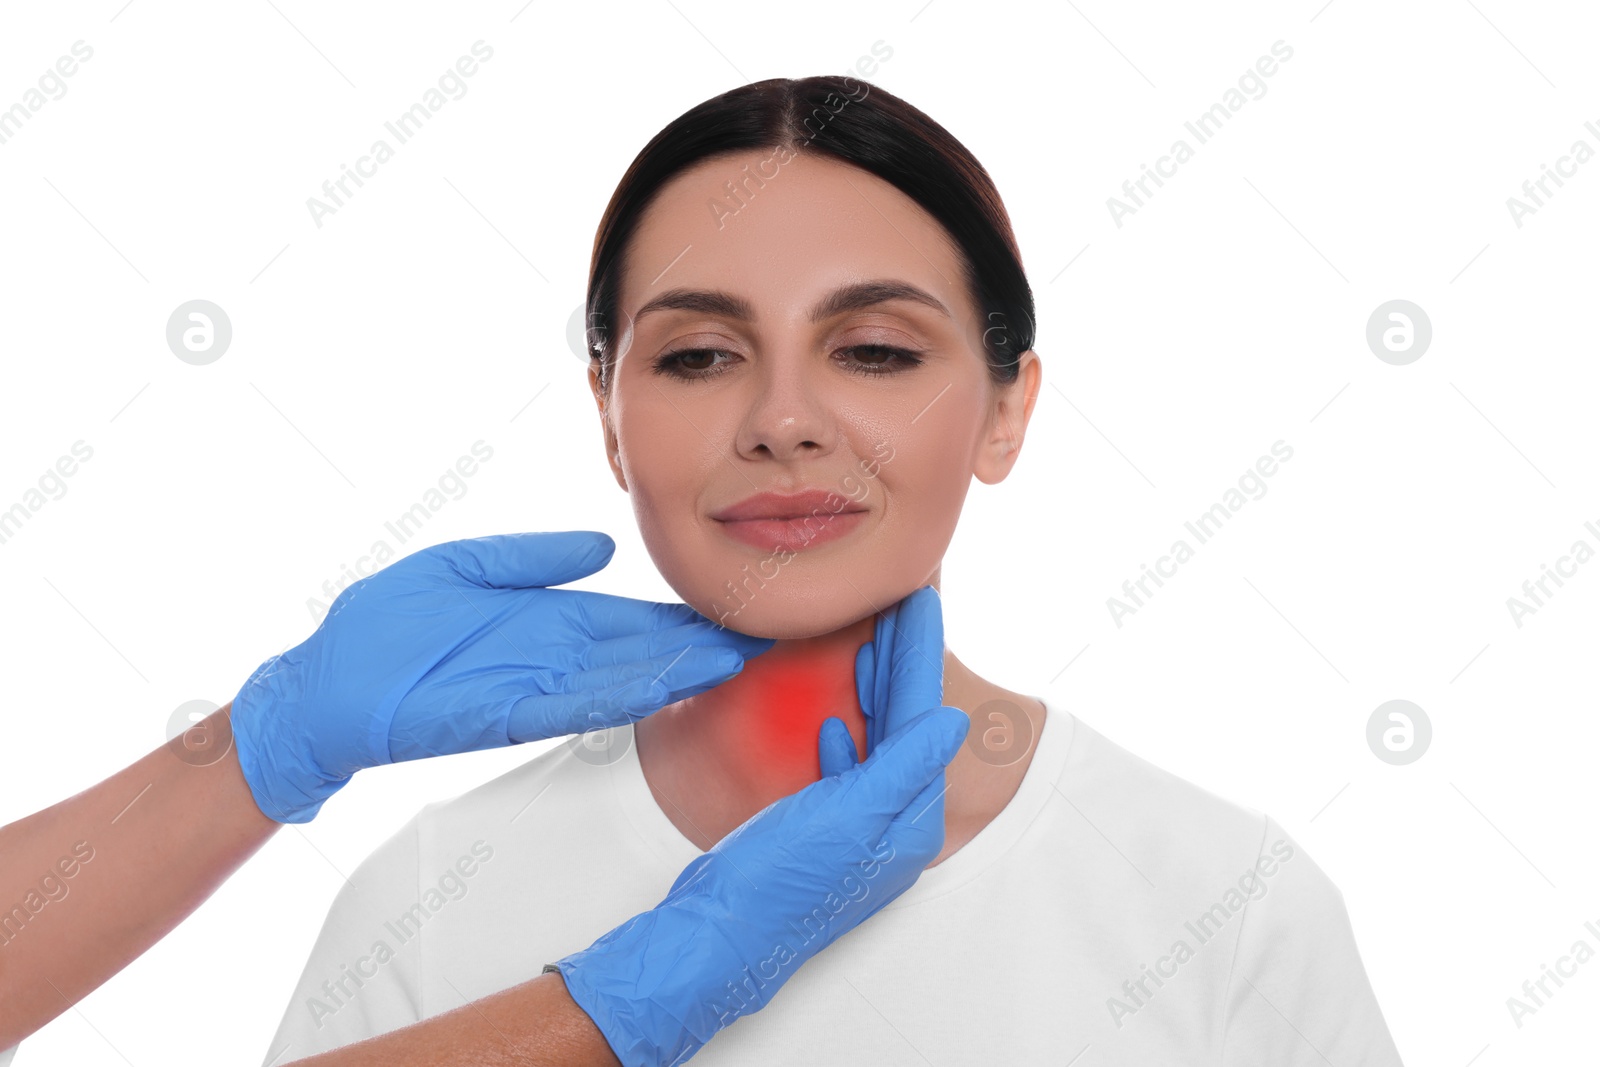 Image of Endocrinologist examining thyroid gland of patient on white background, closeup